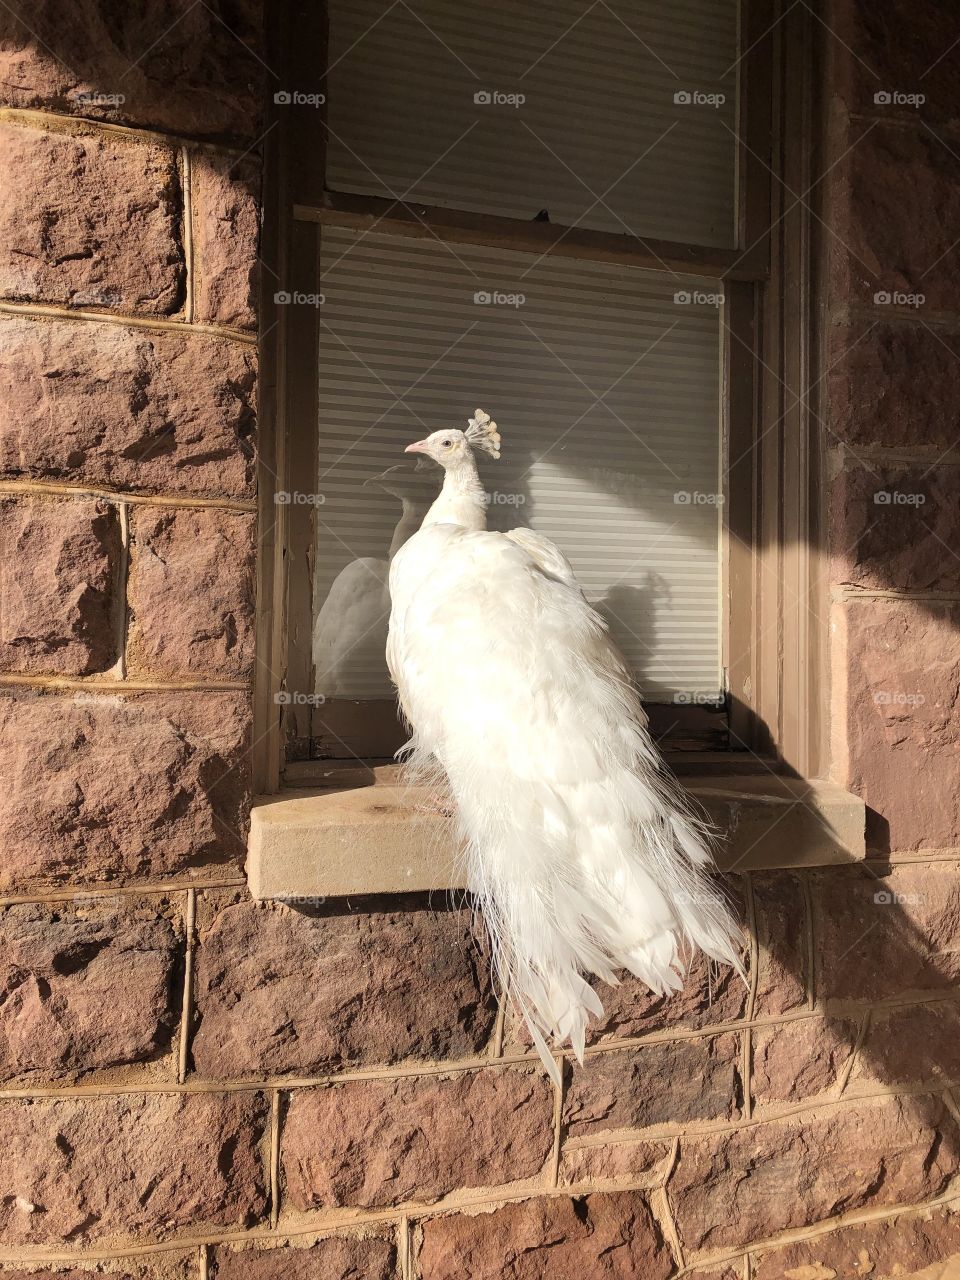 A white peacock sunbathes on the window sill of an old, red, sandstone house in the midst of winter